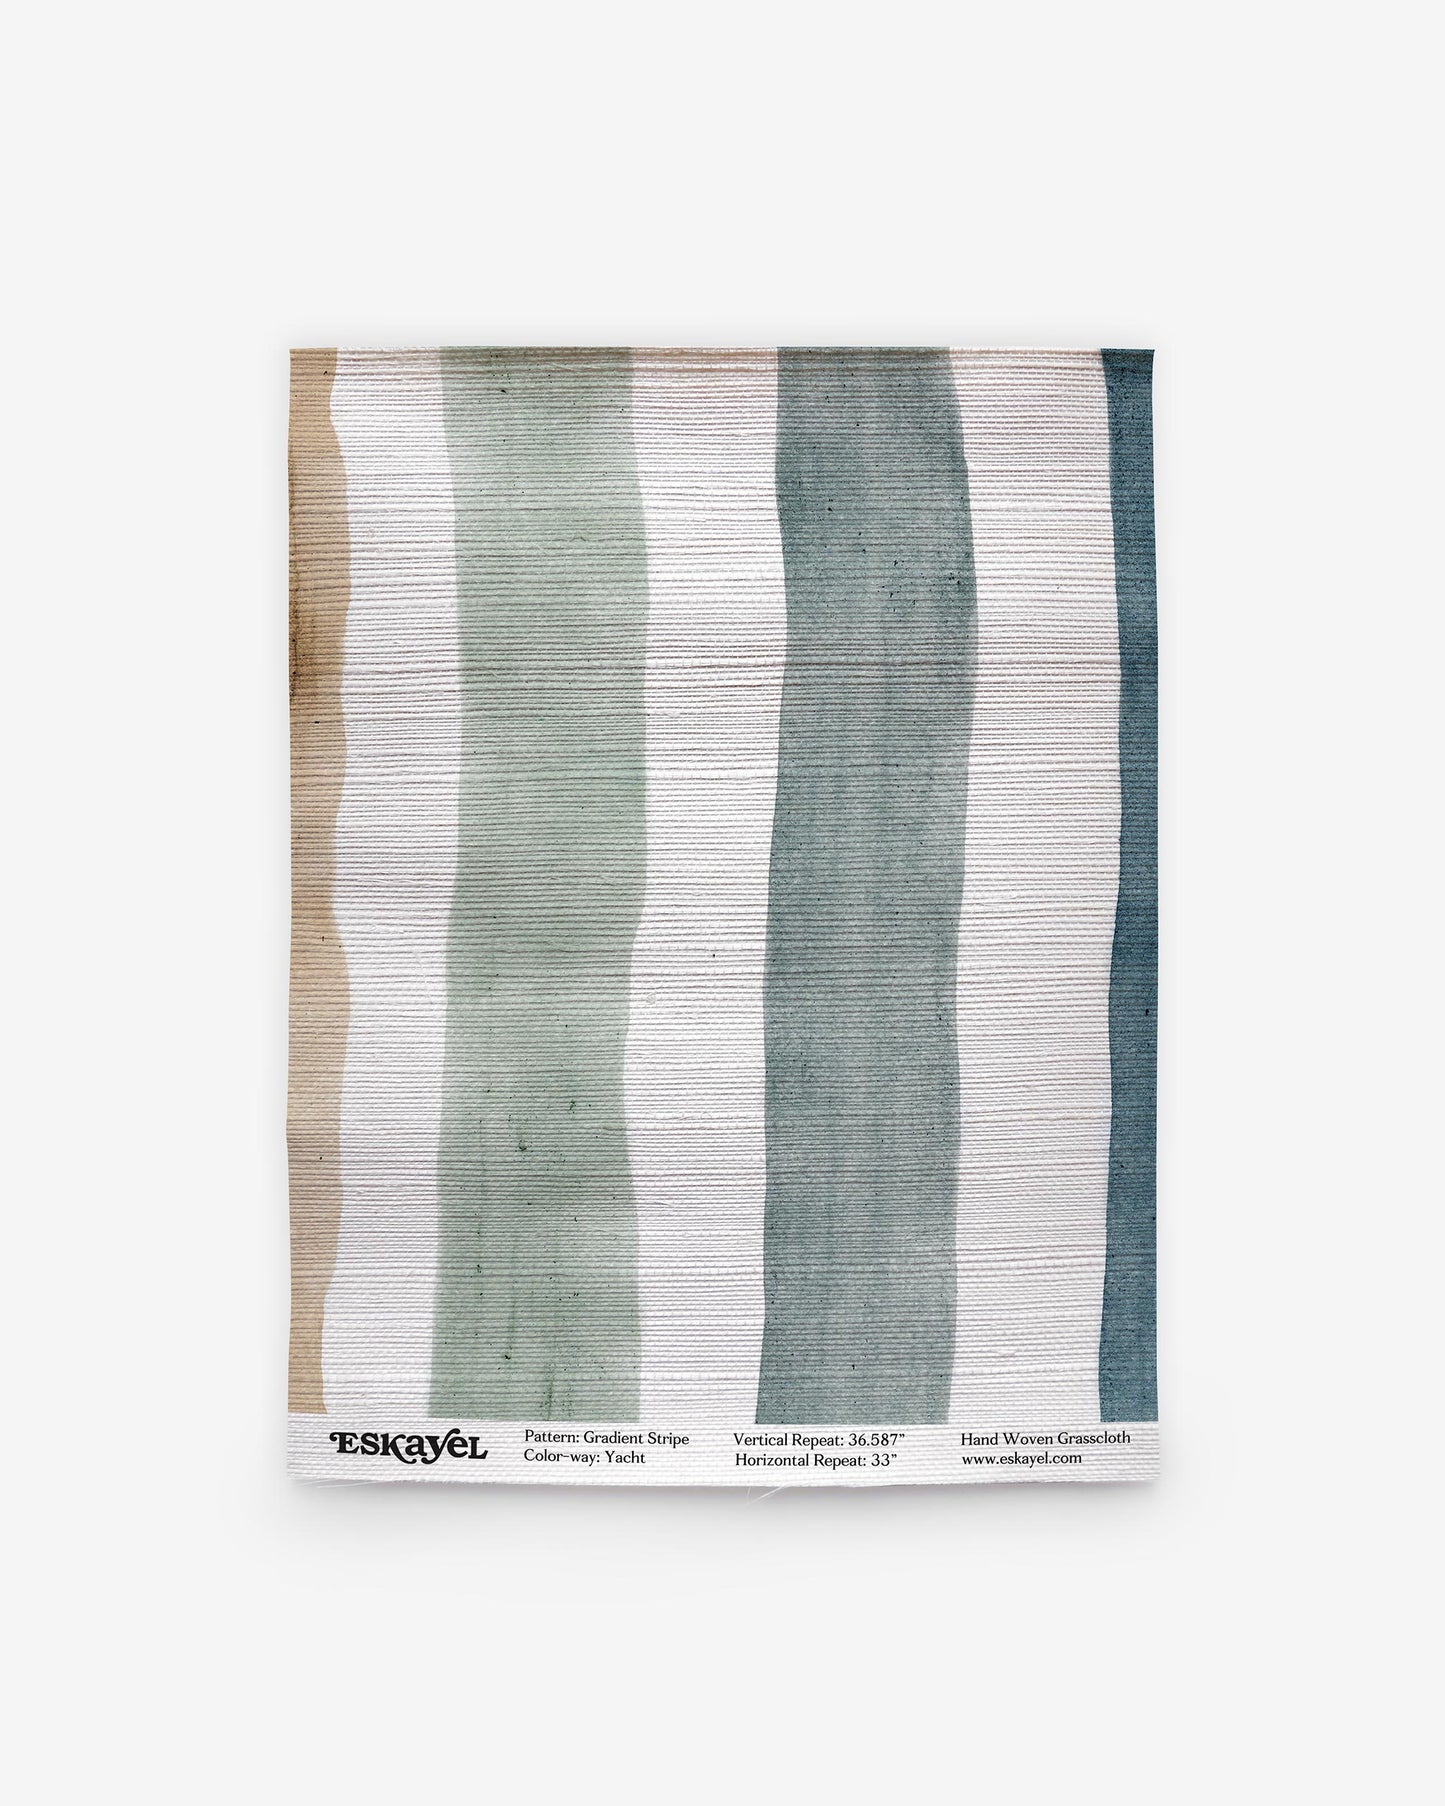 A Gradient Stripe Grasscloth Sample Yacht blue, green, and brown stripe sample